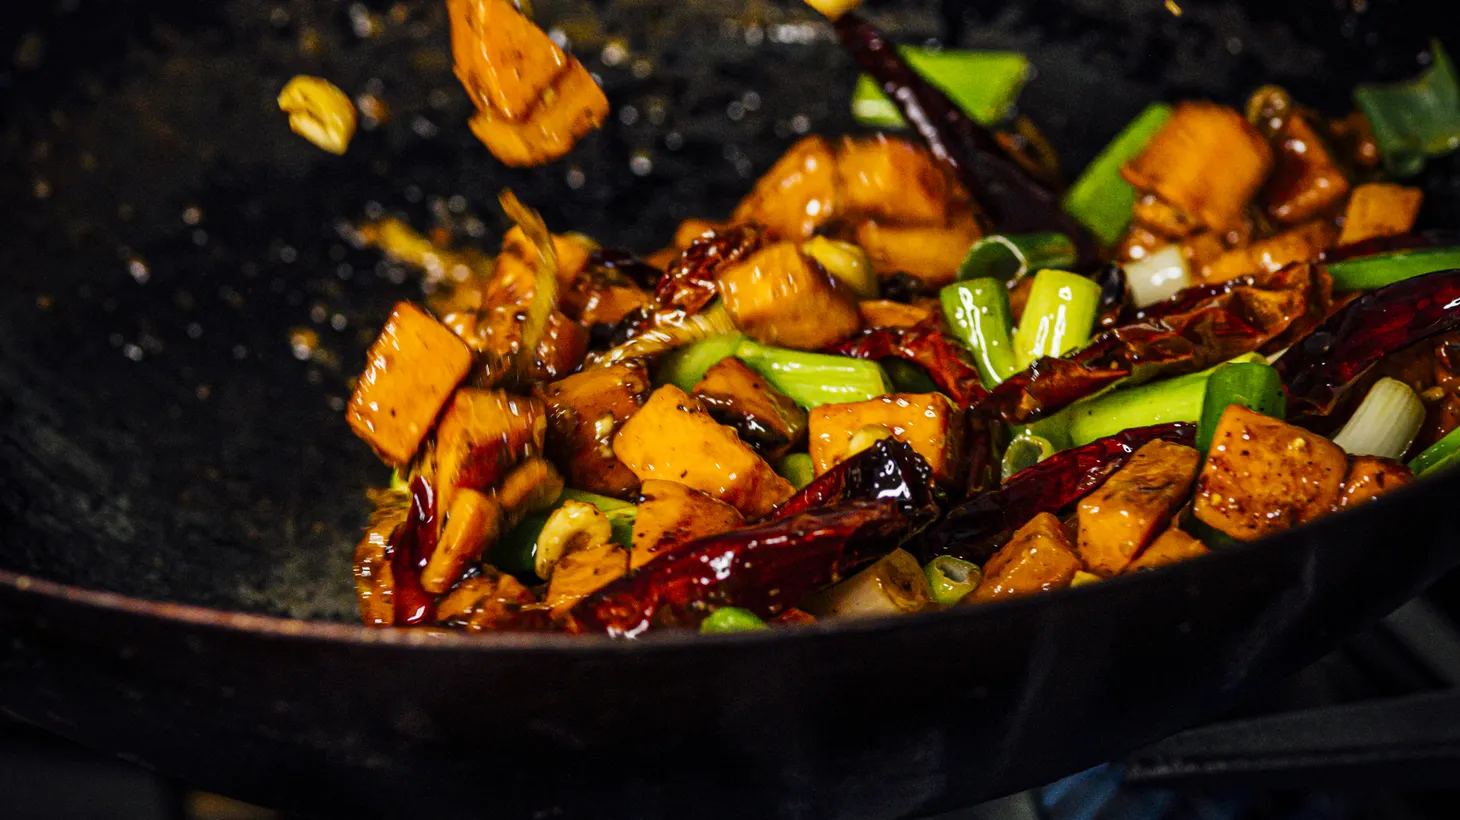 Sichuan peppercorns, chilis, peanuts, and scallions give sweet potatoes a kung pao spin.